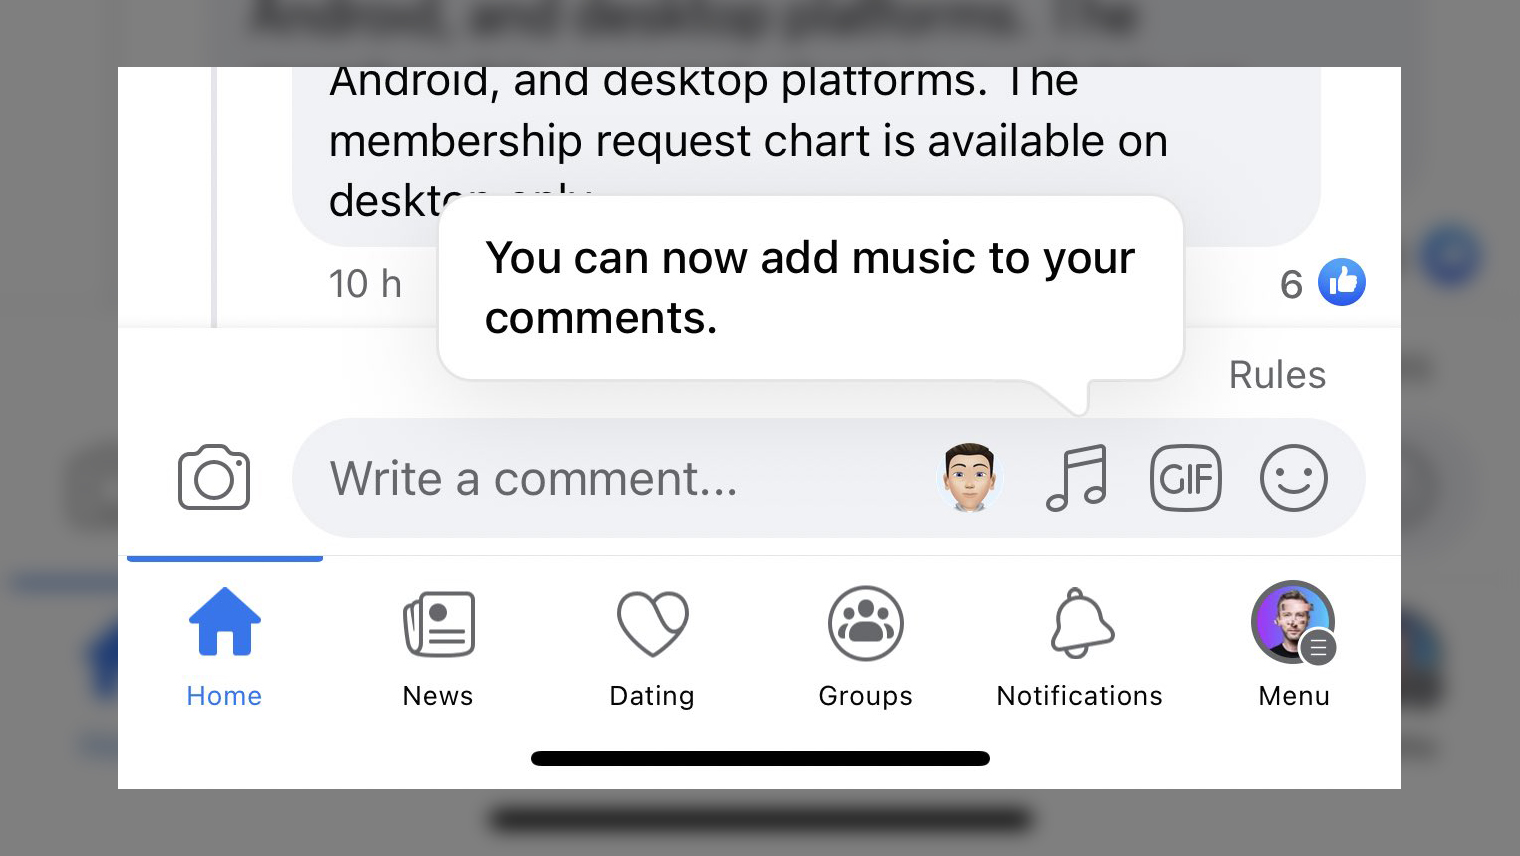 How to upload and attach music to a Facebook comment